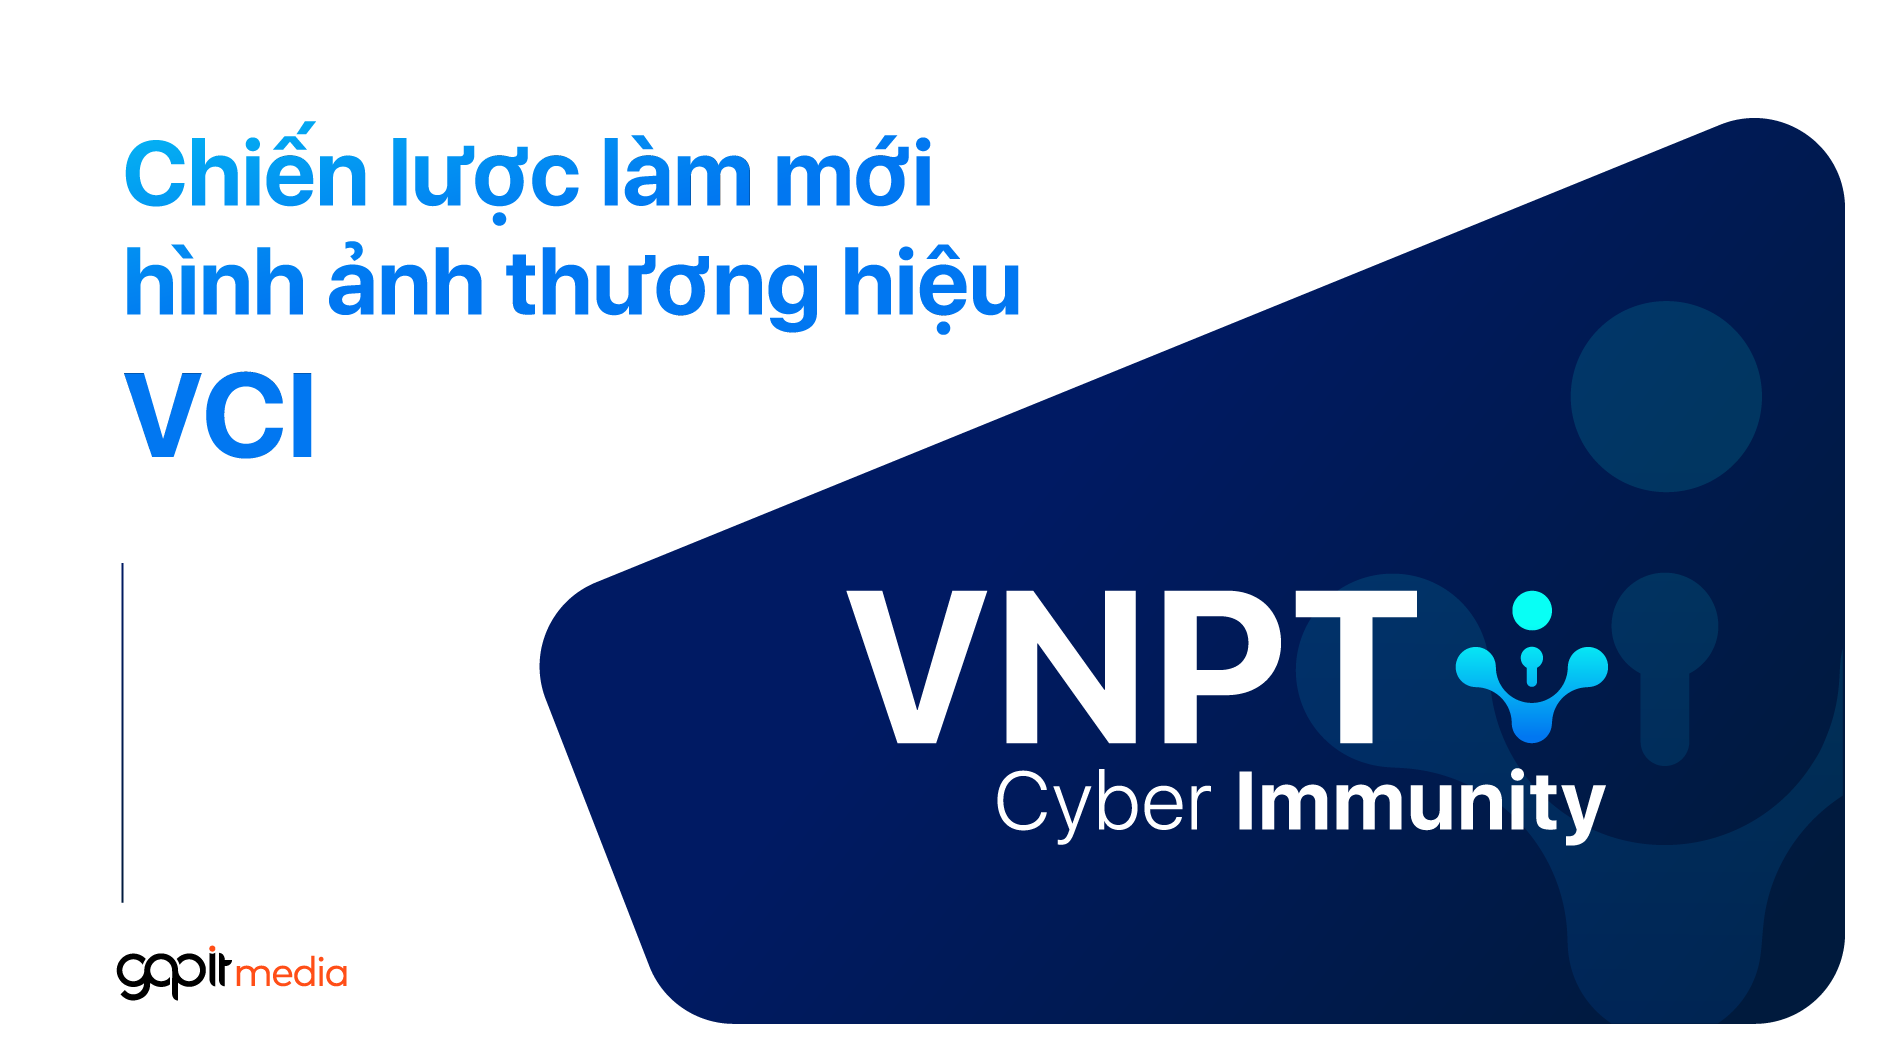 Strategy for refreshing the brand image of VNPT Cyber Immunity